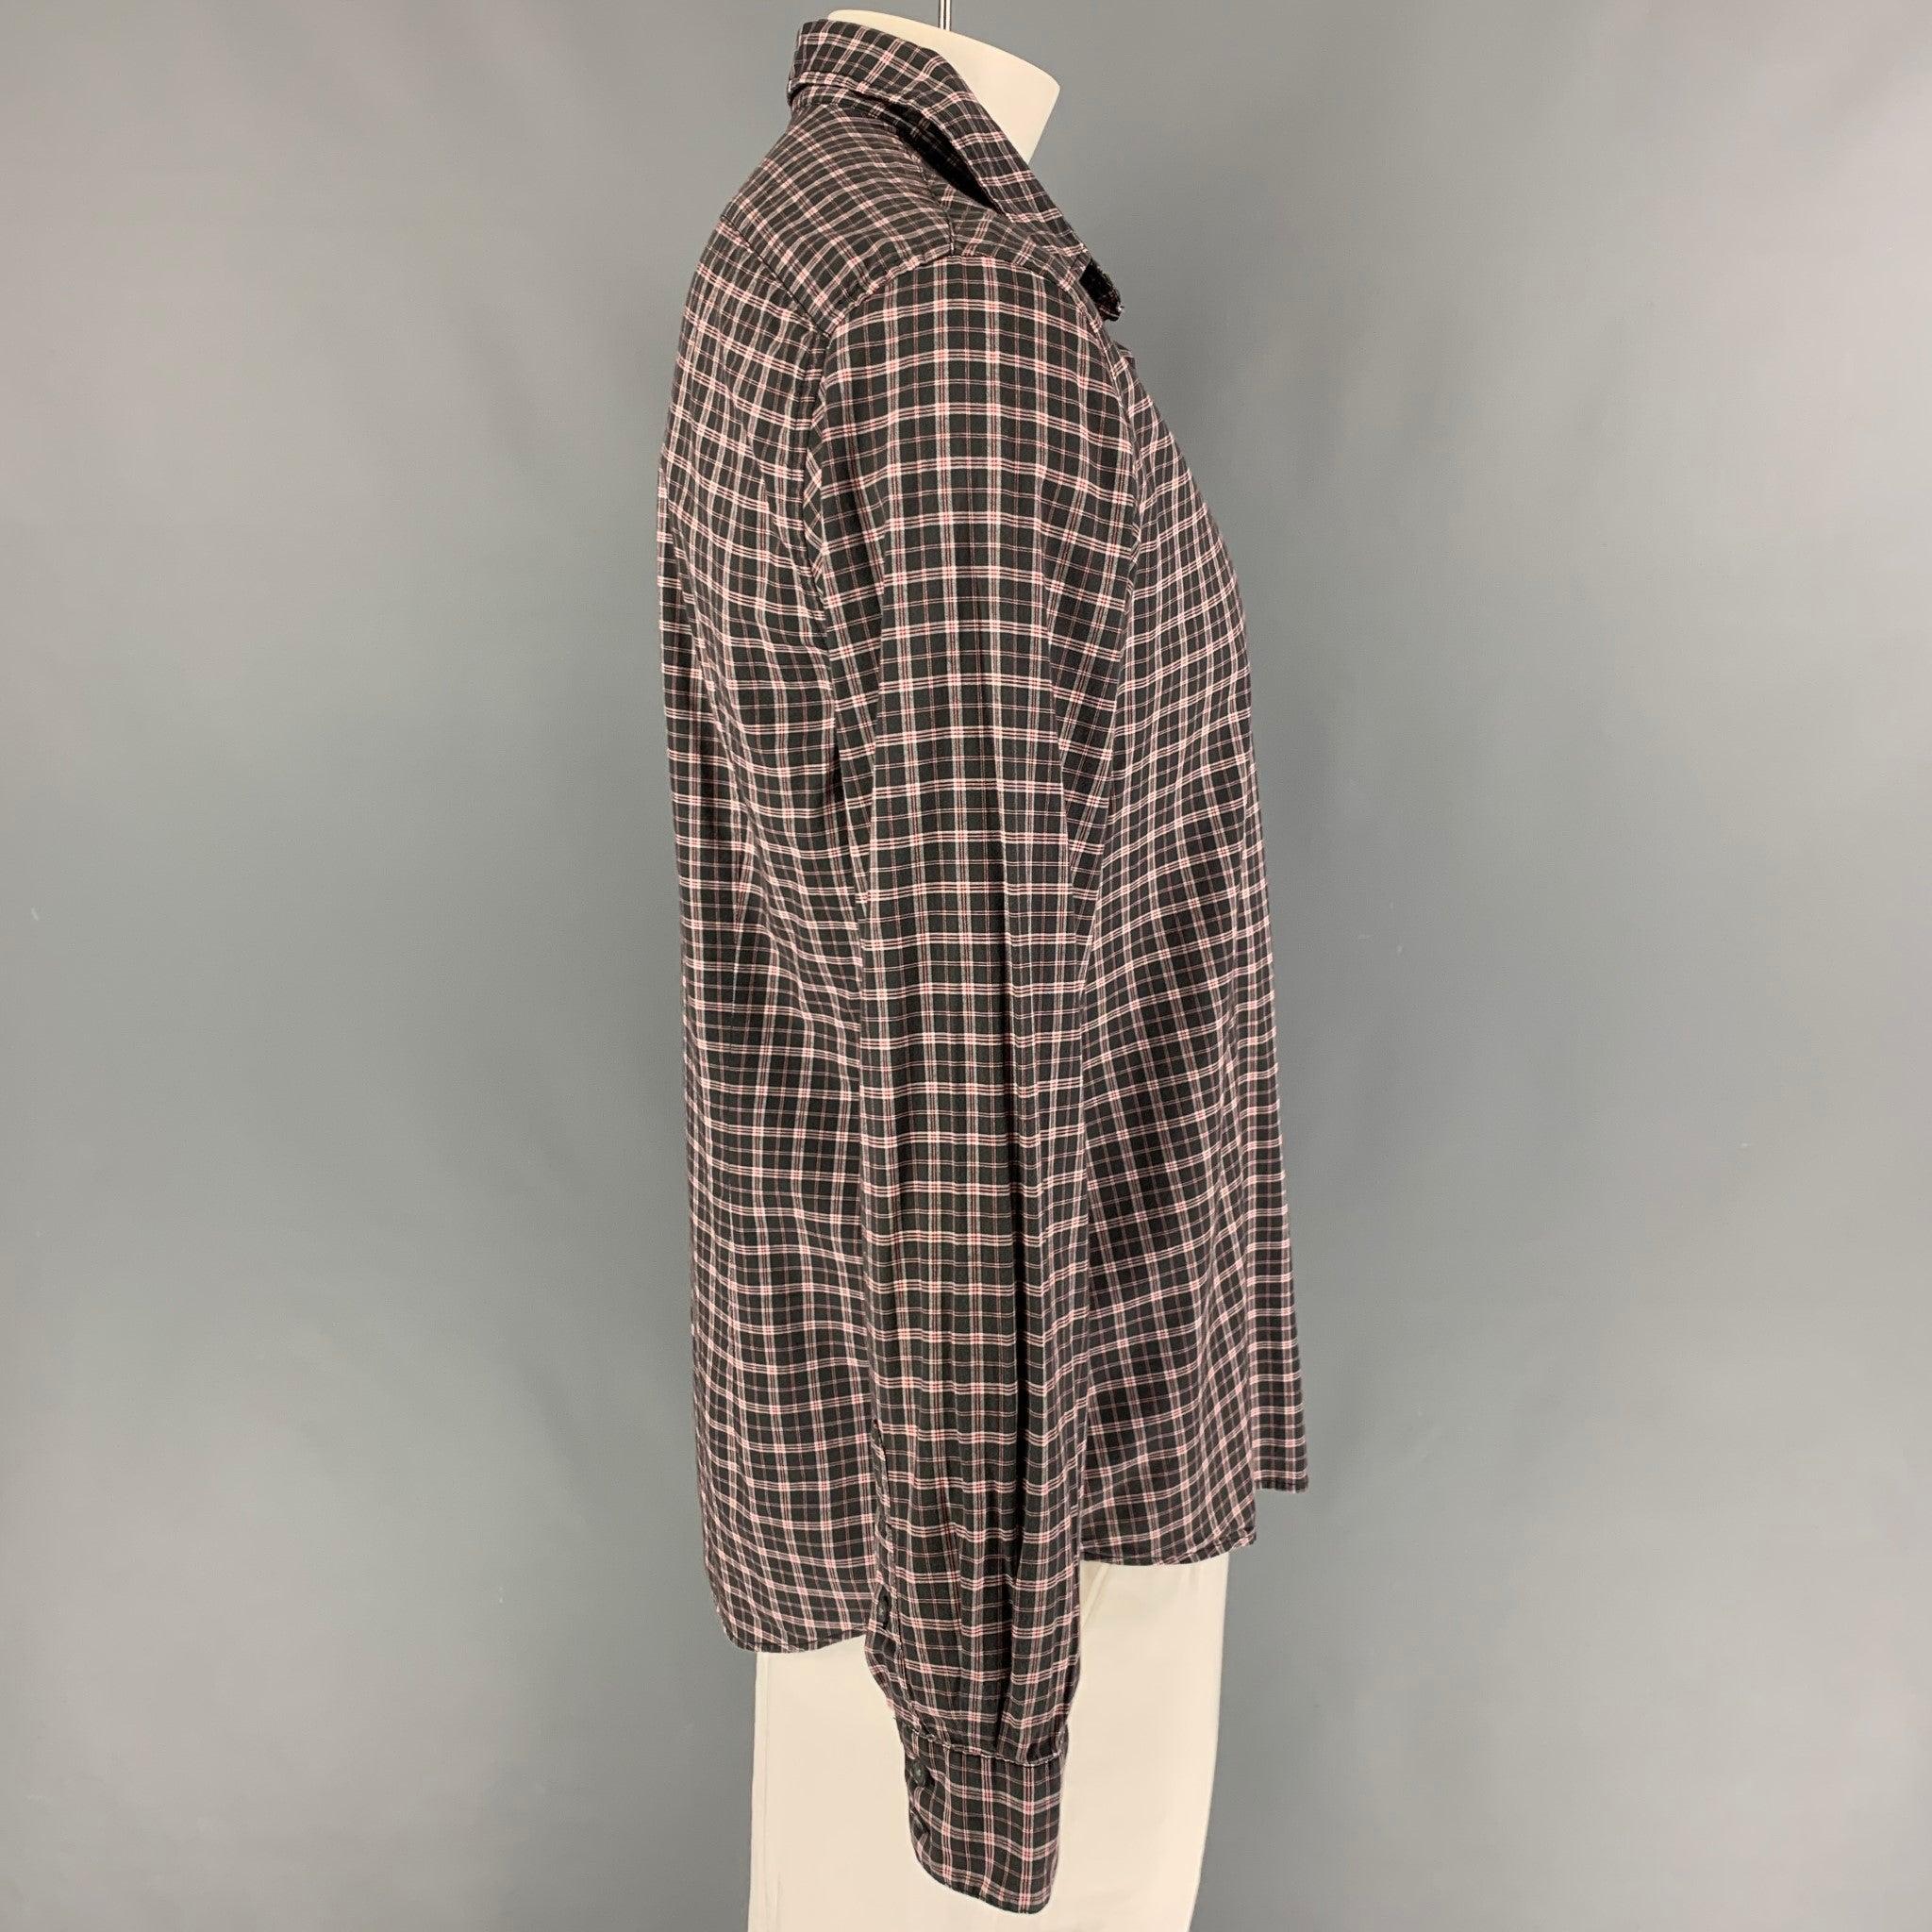 JOHN VARVATOS long sleeve shirt comes in a black & red plaid cotton featuring a spread collar and a button up closure.
Very Good
Pre-Owned Condition. 

Marked:   L  

Measurements: 
 
Shoulder: 18.5 inches  Chest: 44 inches  Sleeve: 25.5 inches 